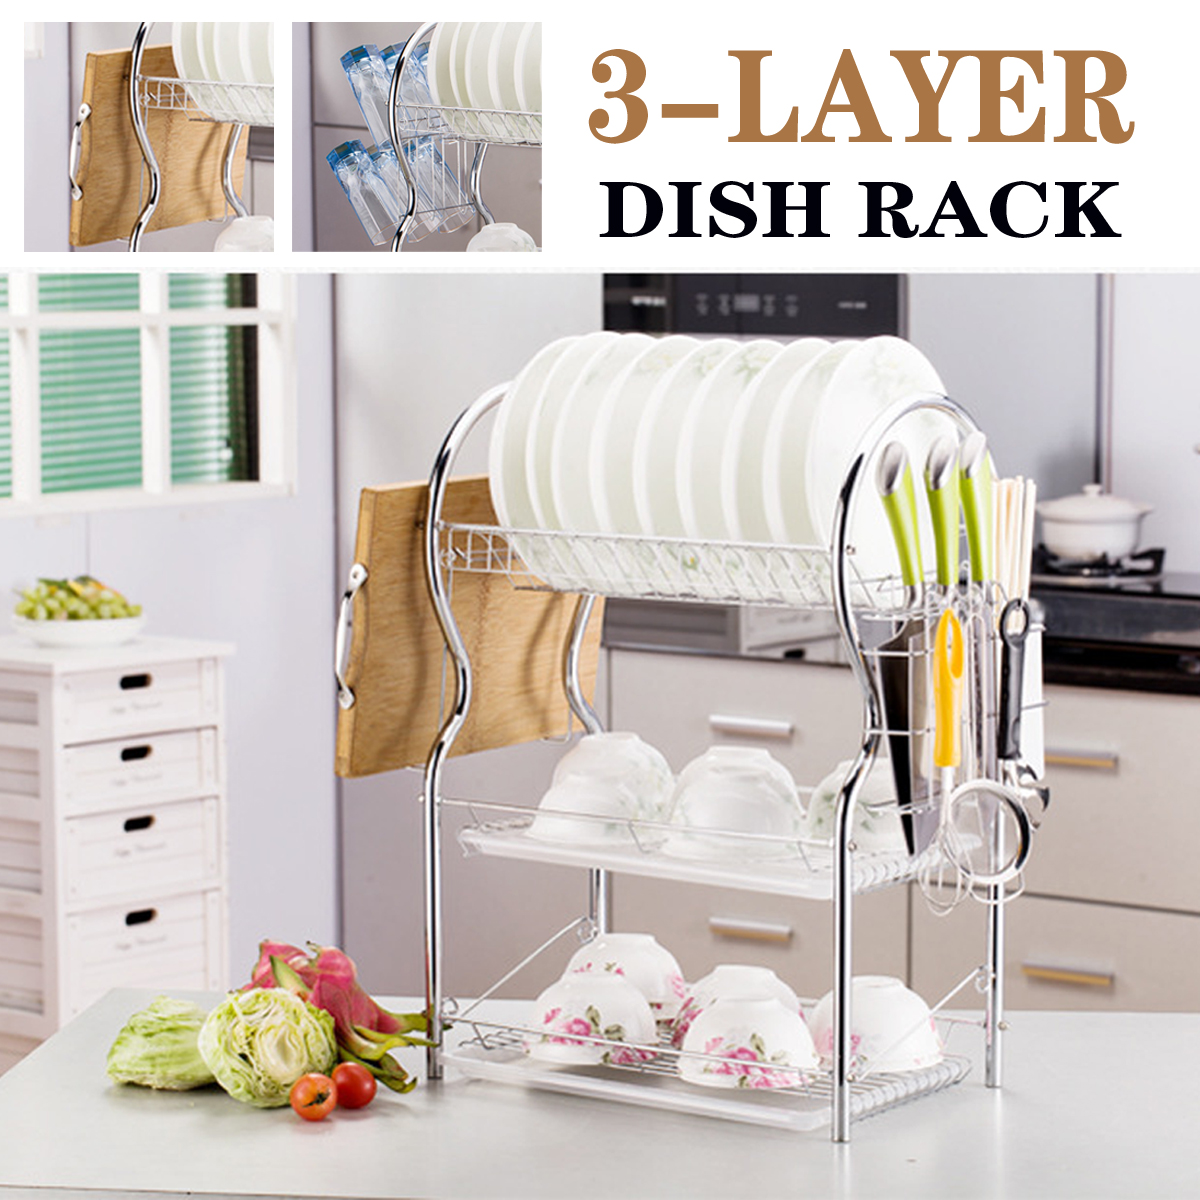 3-Layer-Stainless-Steel-Kitchen-Dish-Rack-Cup-Drying-Drainer-Tray-Cutlery-Holder-1724525-1